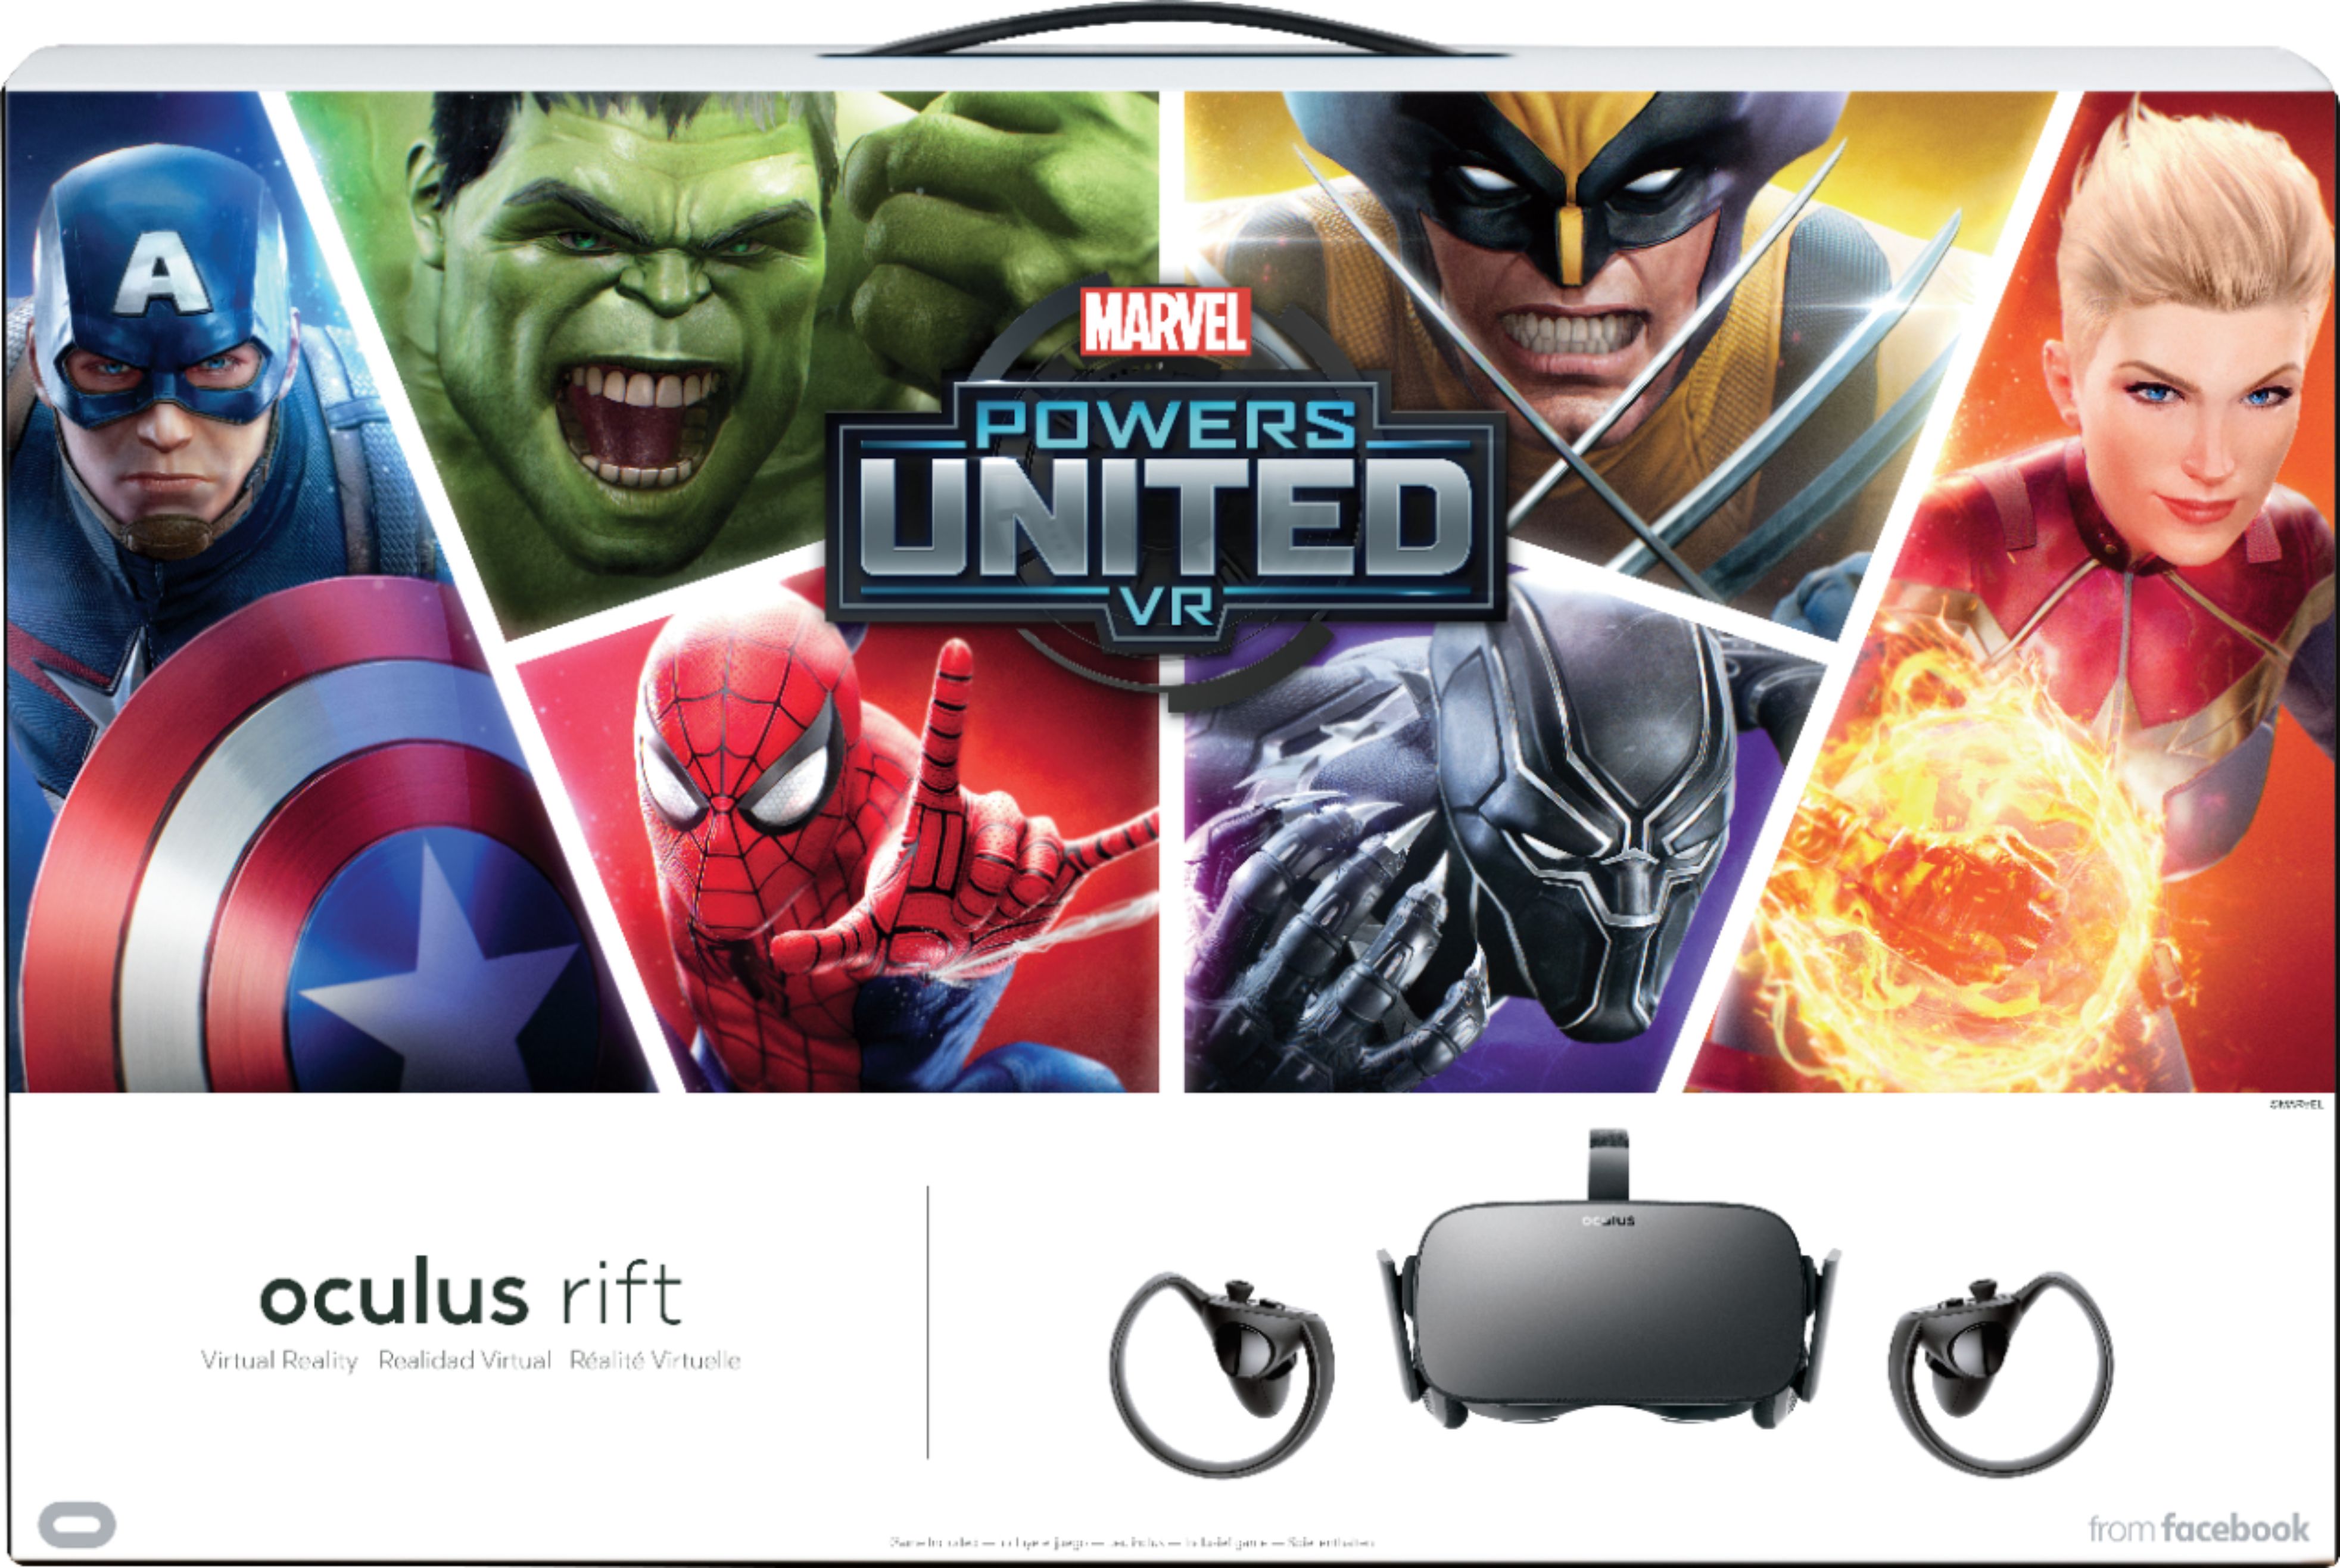 marvel powers united vr oculus quest